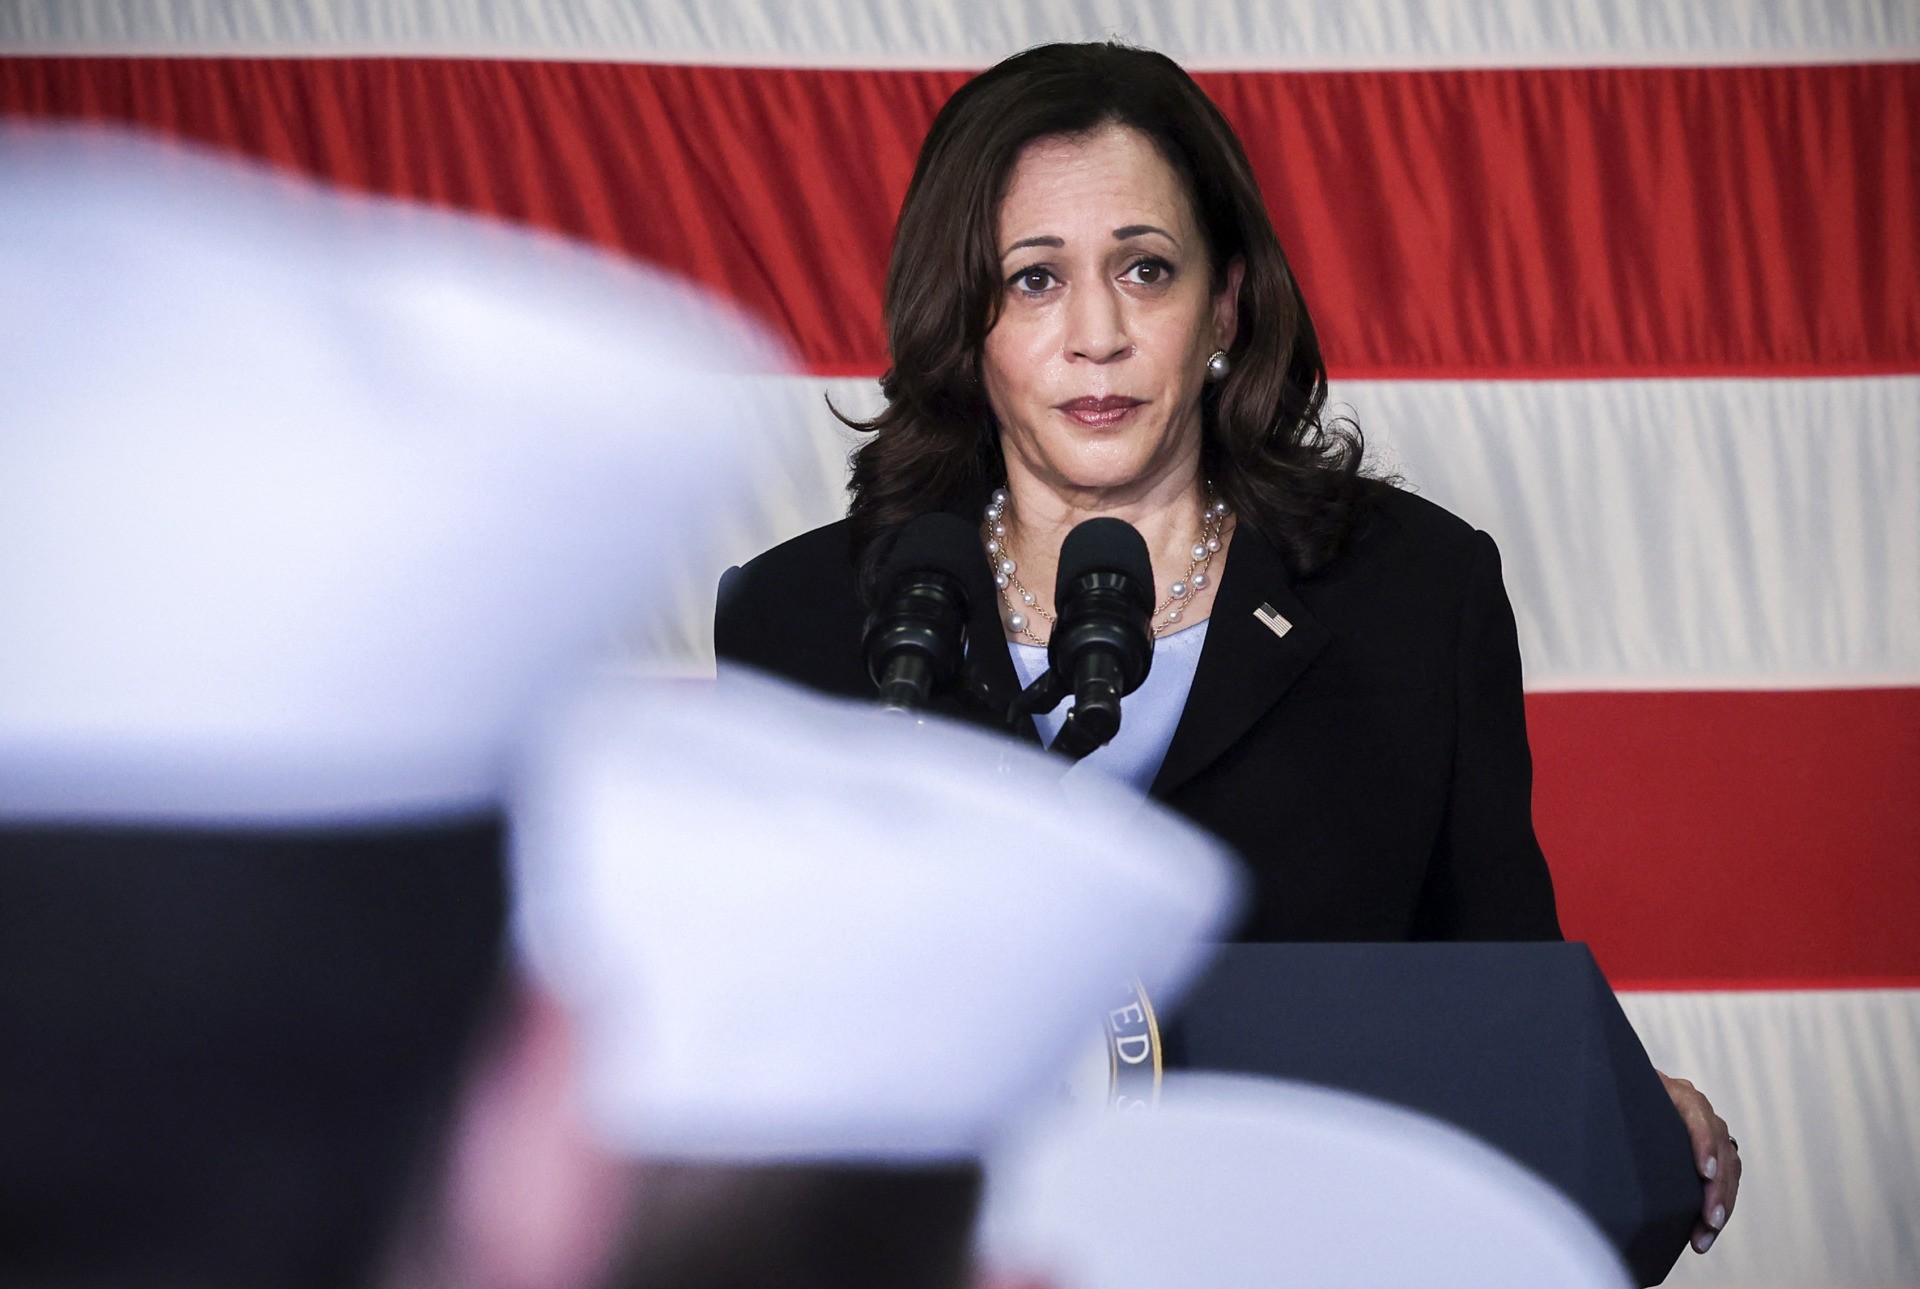 US Vice President Kamala Harris speaks to troops as she visits the USS Tulsa in Singapore on August 23, 2021. (Photo by EVELYN HOCKSTEIN / POOL / AFP) (Photo by EVELYN HOCKSTEIN/POOL/AFP via Getty Images)